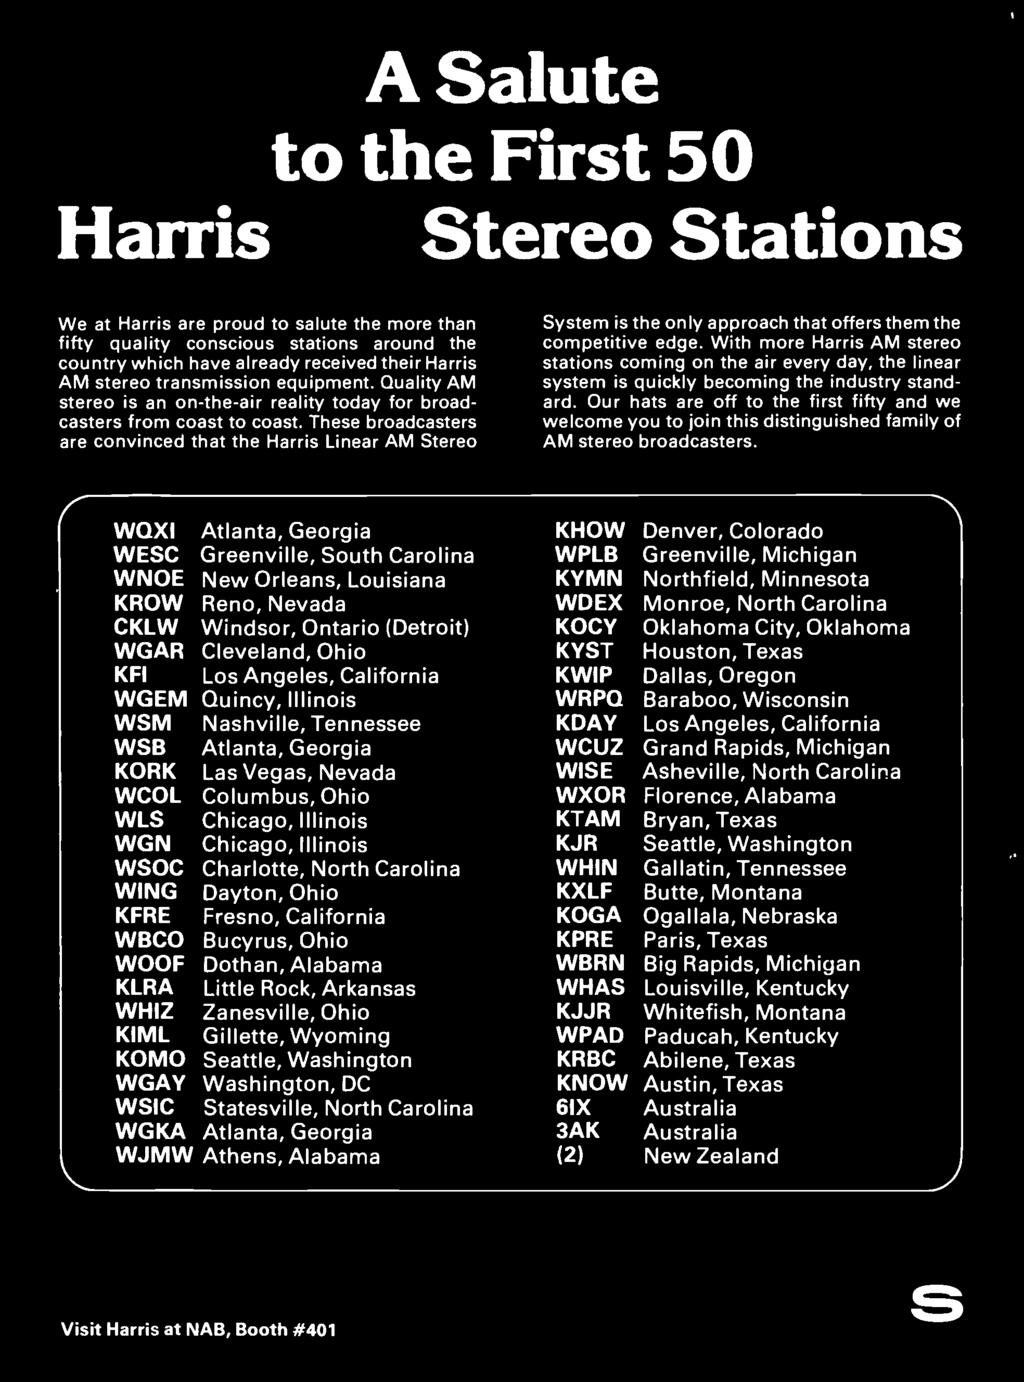 These broadcasters are convinced that the Harris Linear AM Stereo System is the only approach that offers them the competitive edge.